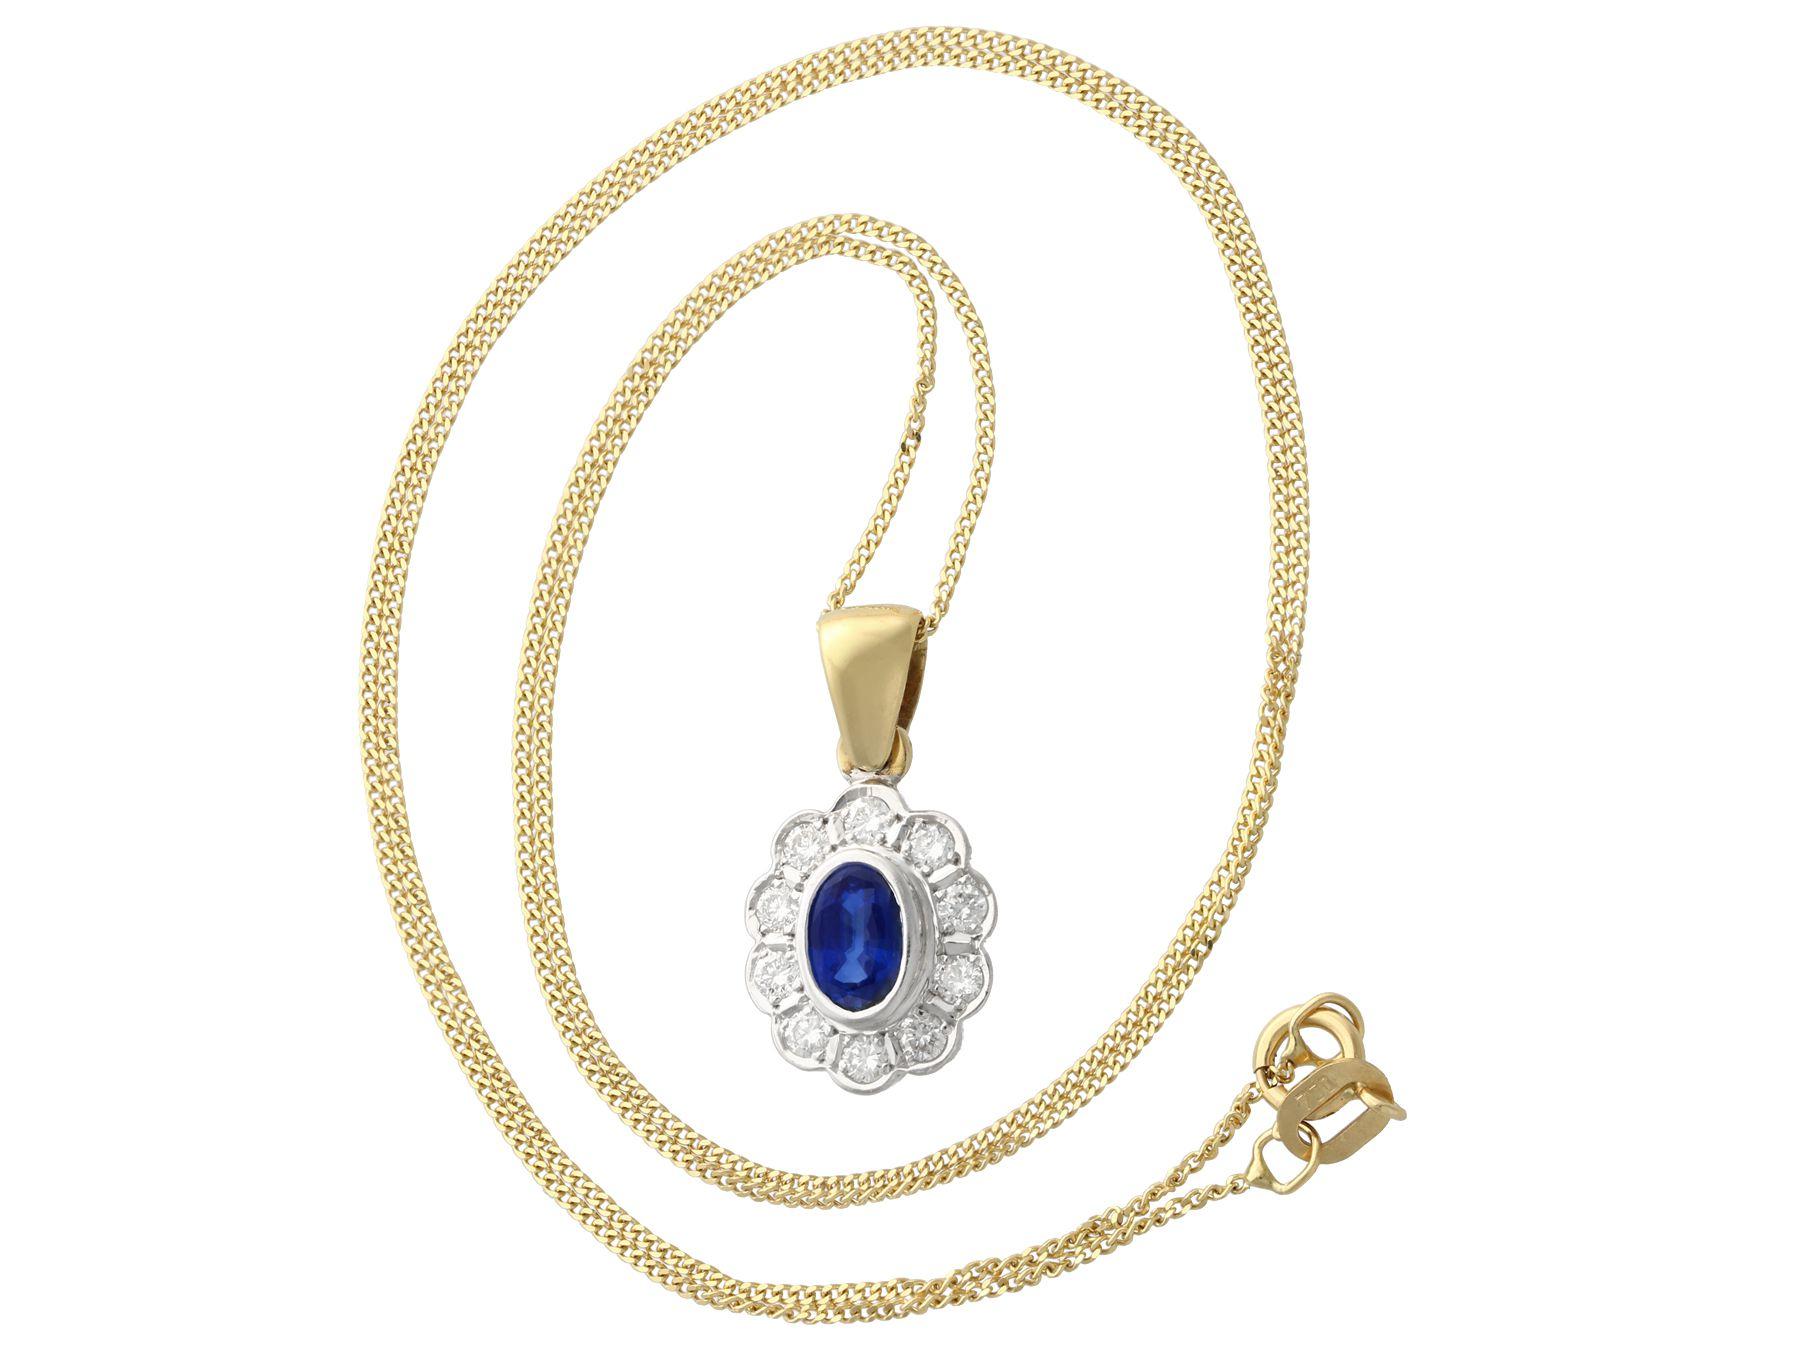 A fine and impressive vintage 0.57 carat natural blue sapphire and 0.40 carat diamond, 18 karat yellow gold, 18 karat white gold set pendant; an addition to our vintage jewelry and estate jewelry collections.

This impressive sapphire and diamond